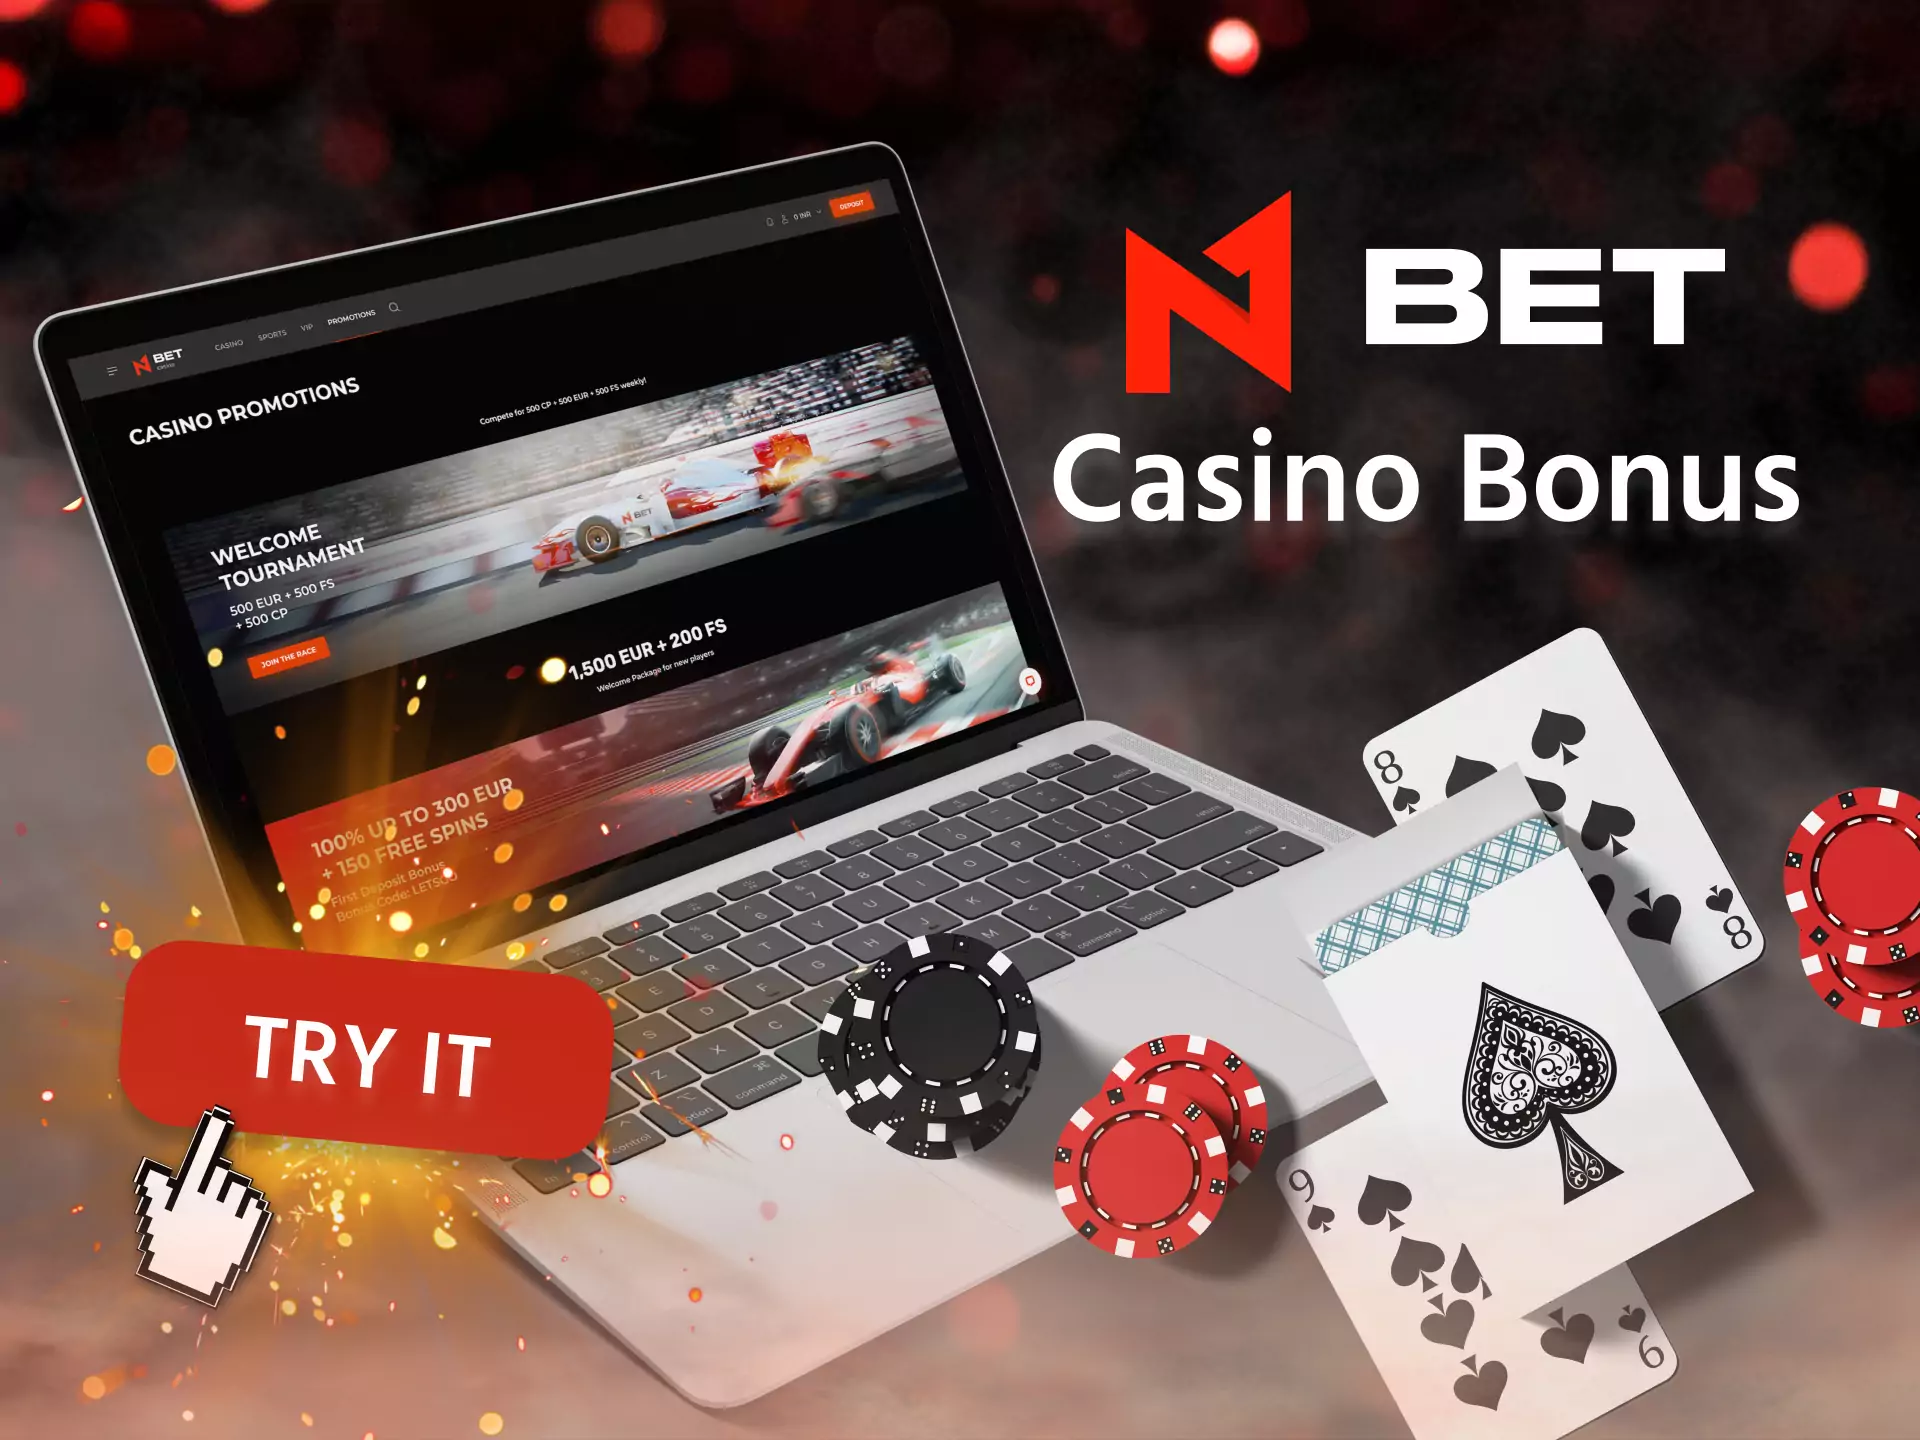 Try a special casino bonus from N1Bet.